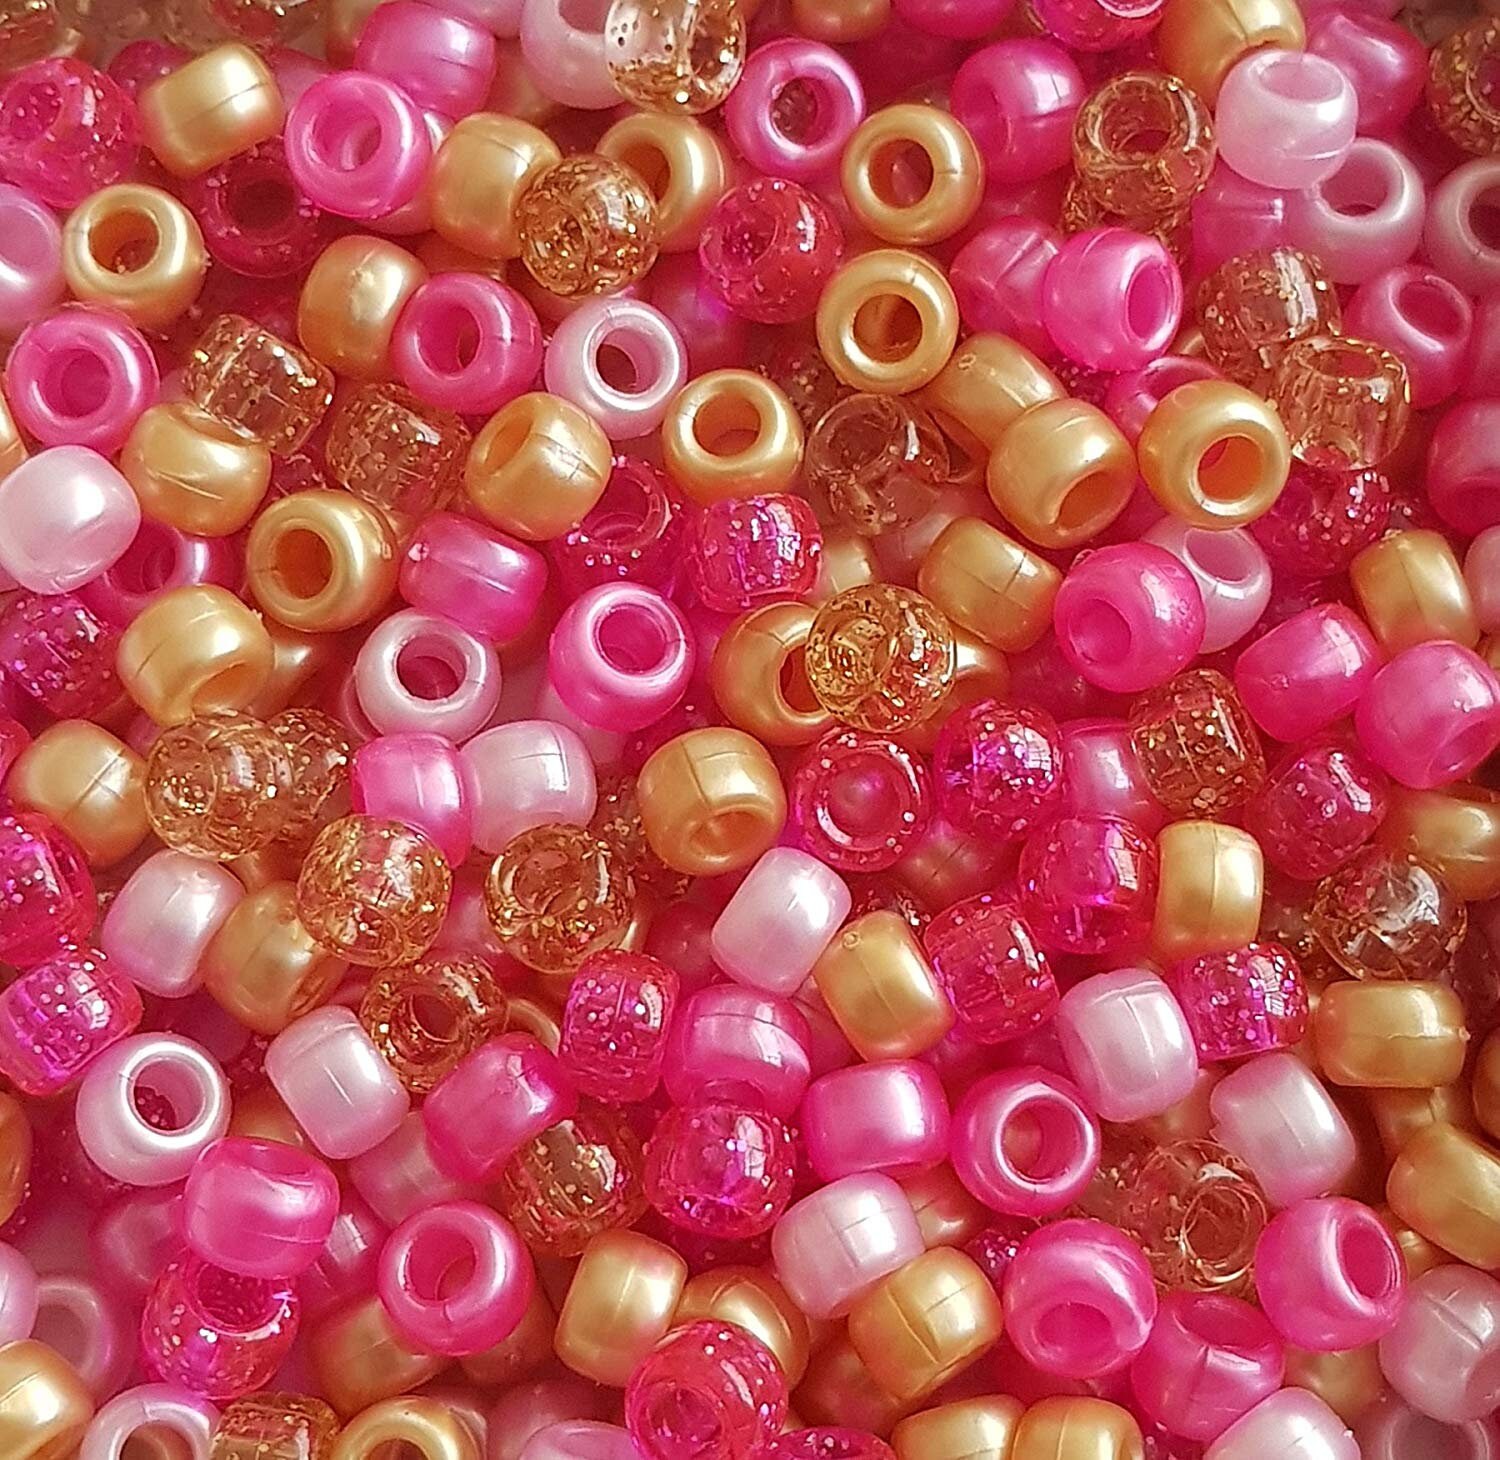 Red Transparent 9x6mm Authentic Beadery USA Plastic Pony Beads 